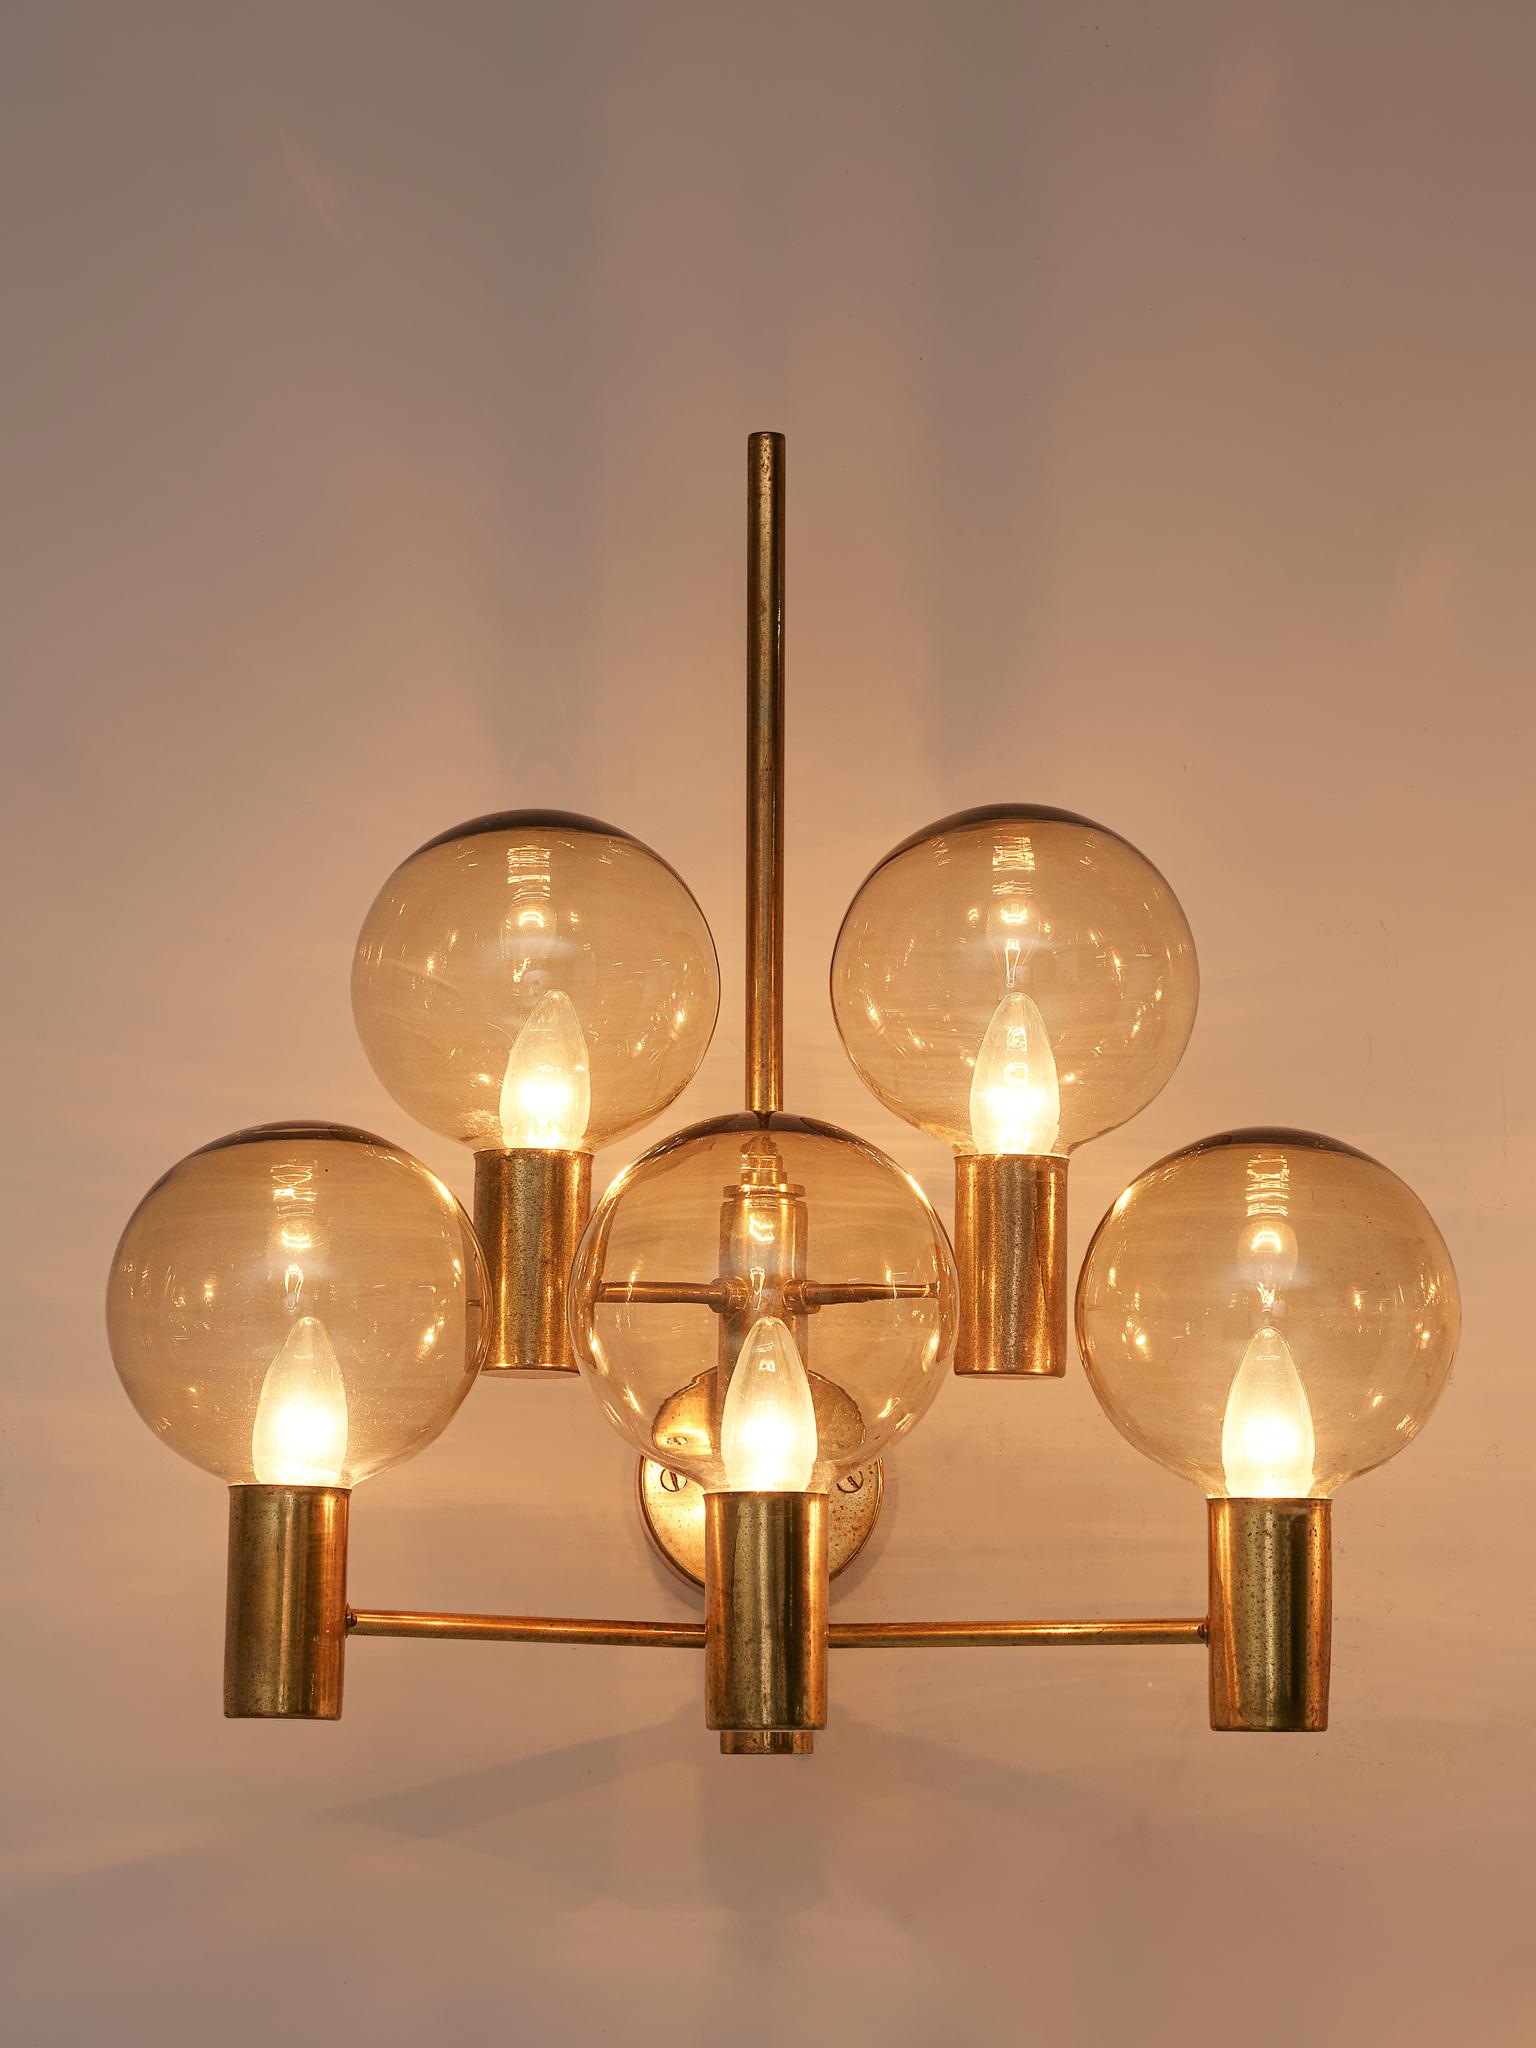 Hans-Agne Jakobsson, wall light, brass, glass, Sweden, 1960s.

A large wall light in patinated brass with clear glass shades by Hans-Agne Jakobsson. Divided over five arms this light creates a stunning light partition. The lights are large and